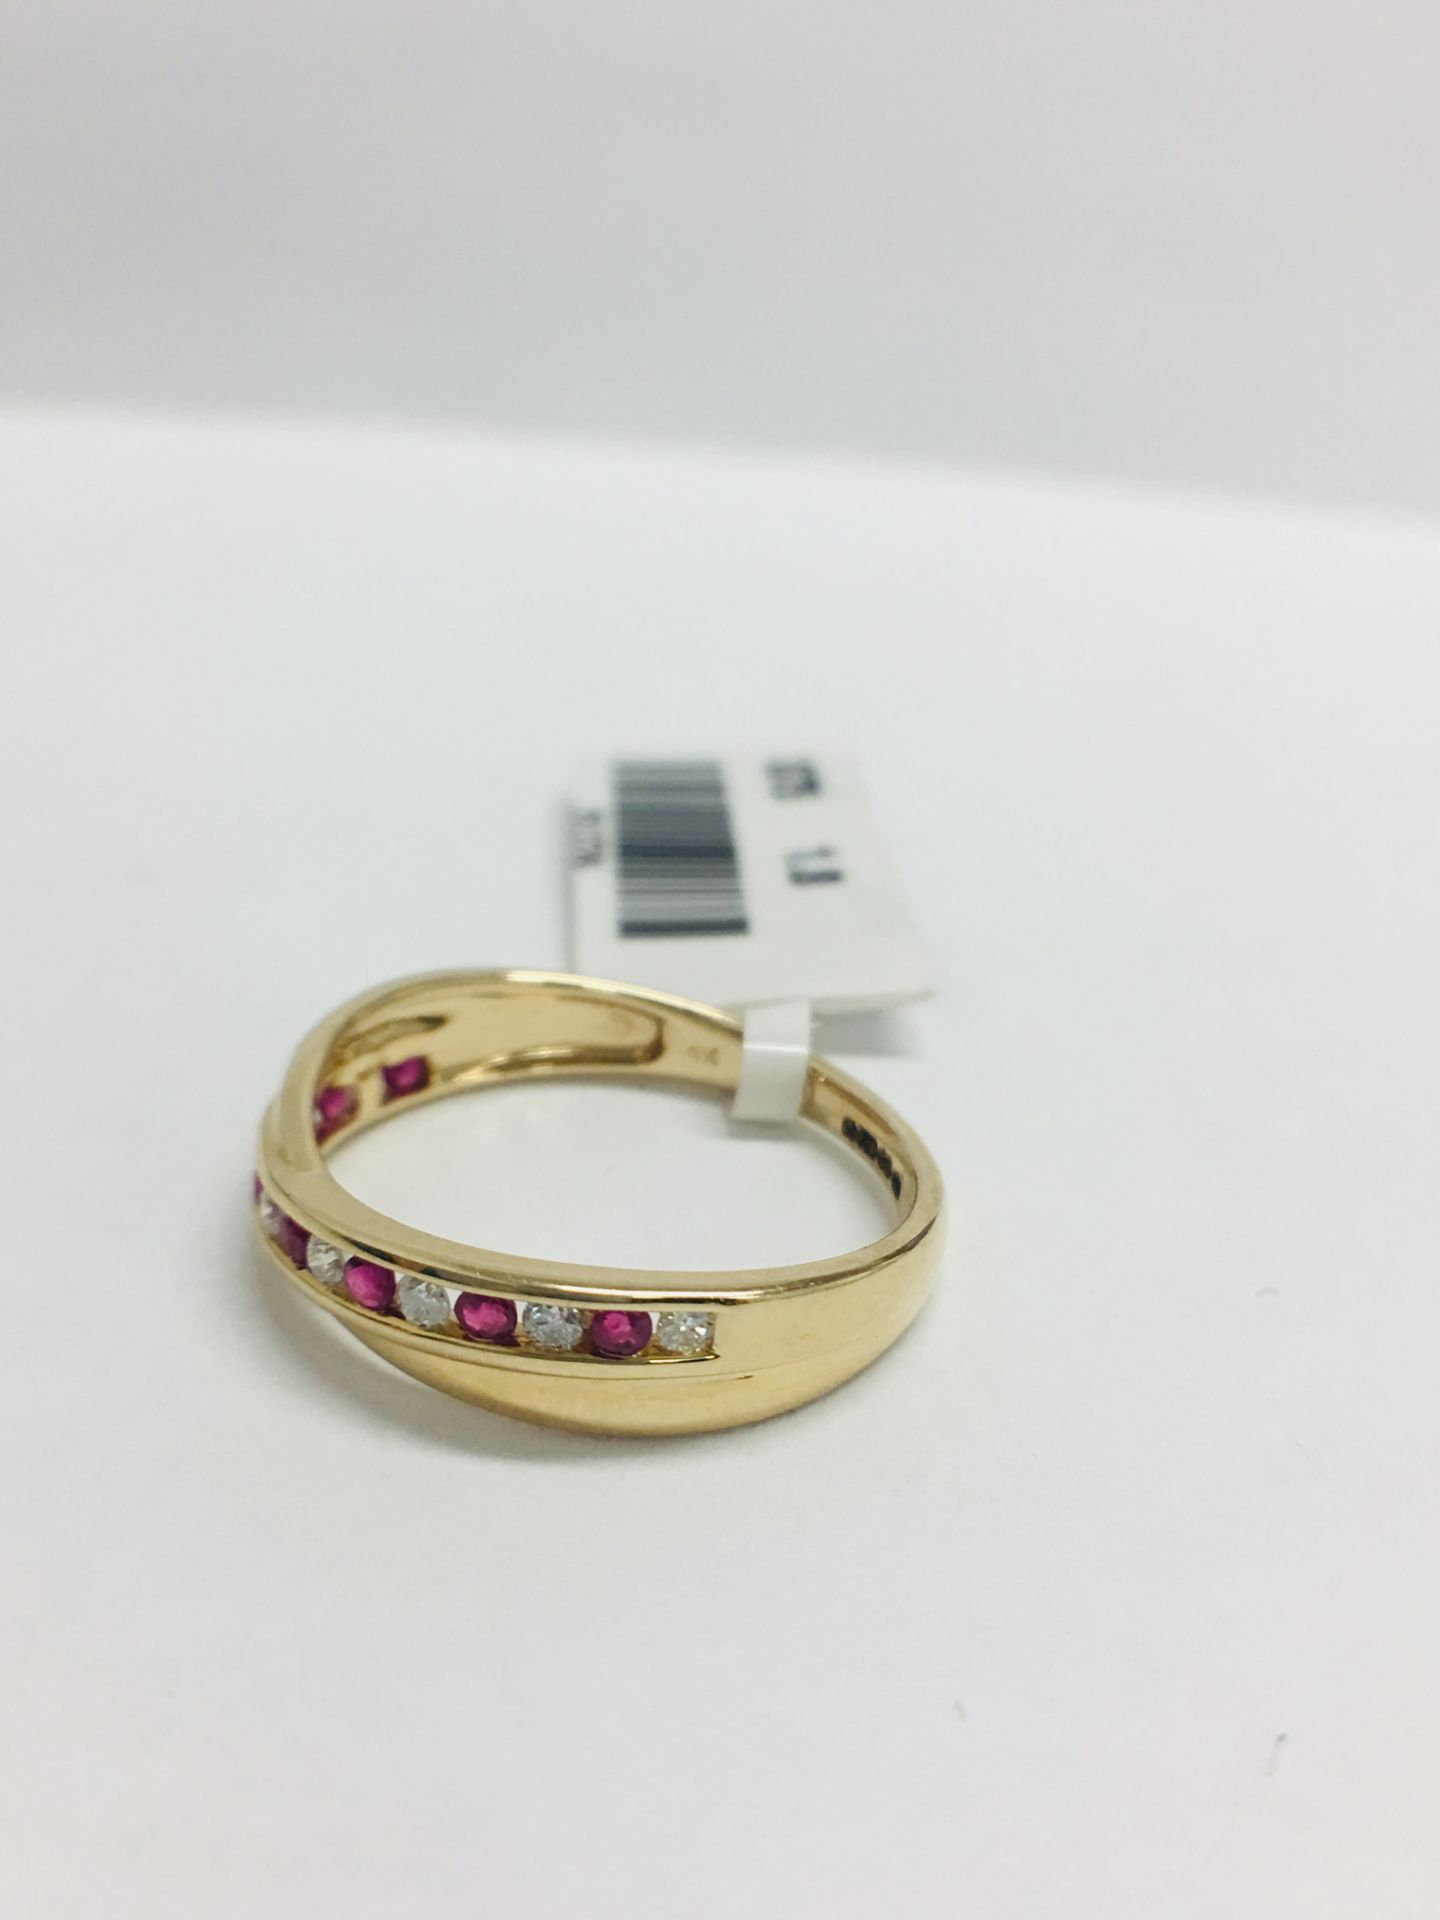 9ct Yellow Gold Ruby Diamond Crossover Band Ring - Image 3 of 8